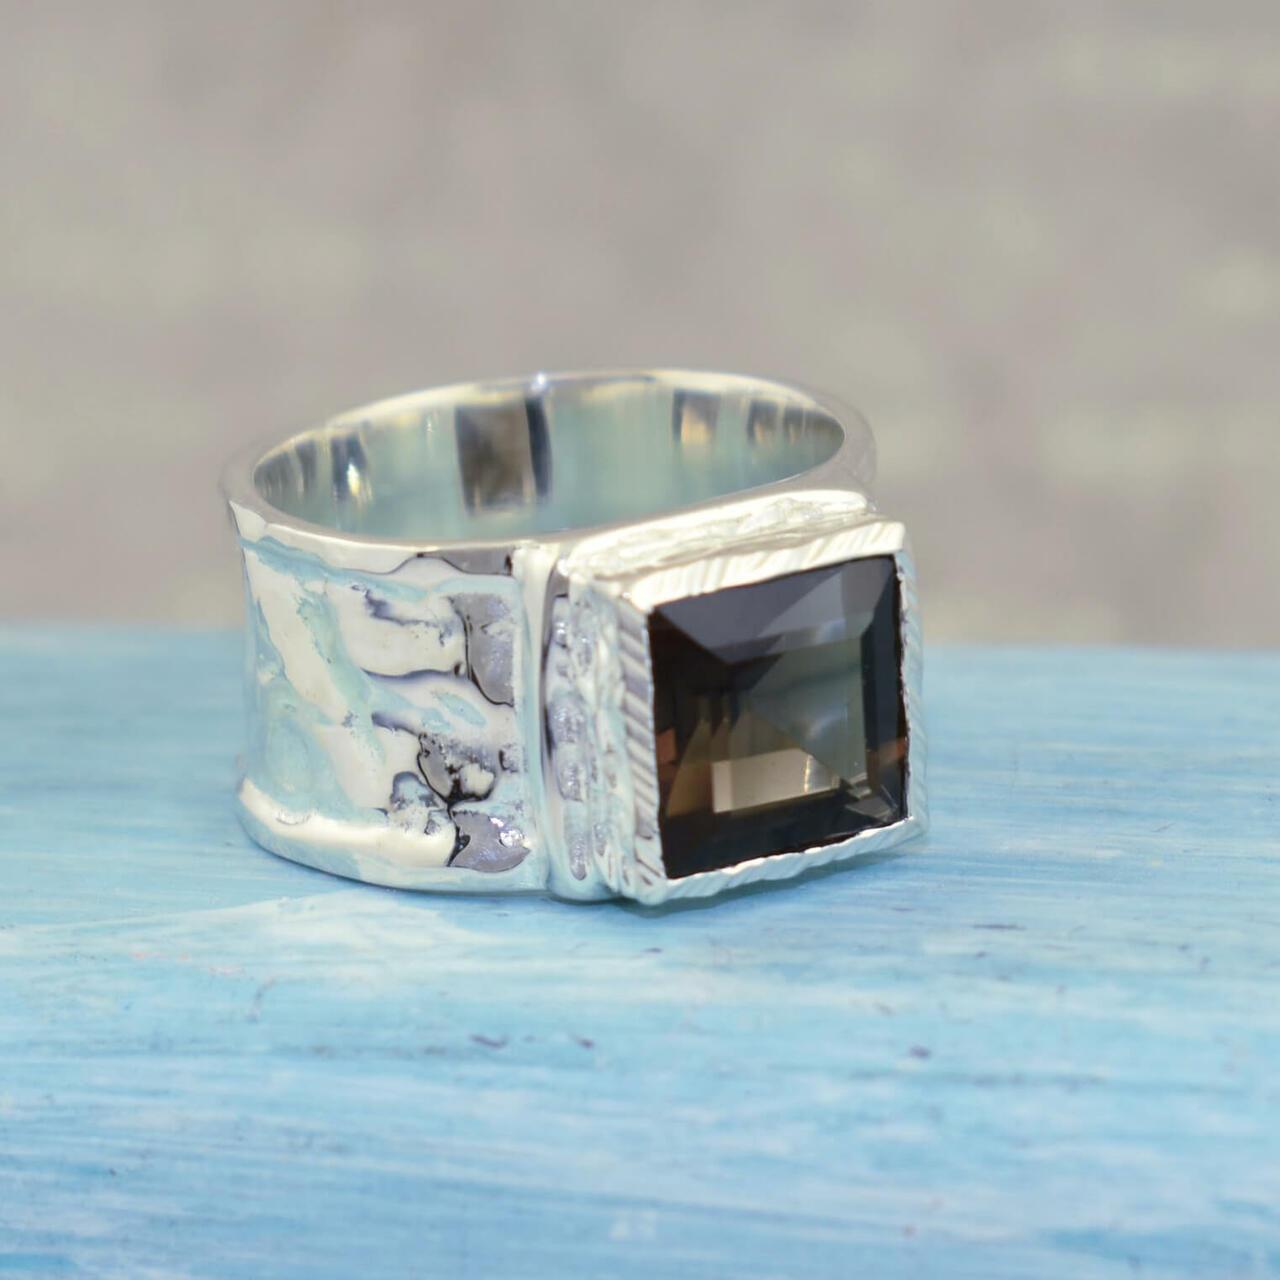 Square smoky quartz stone set in sterling silver hammered band